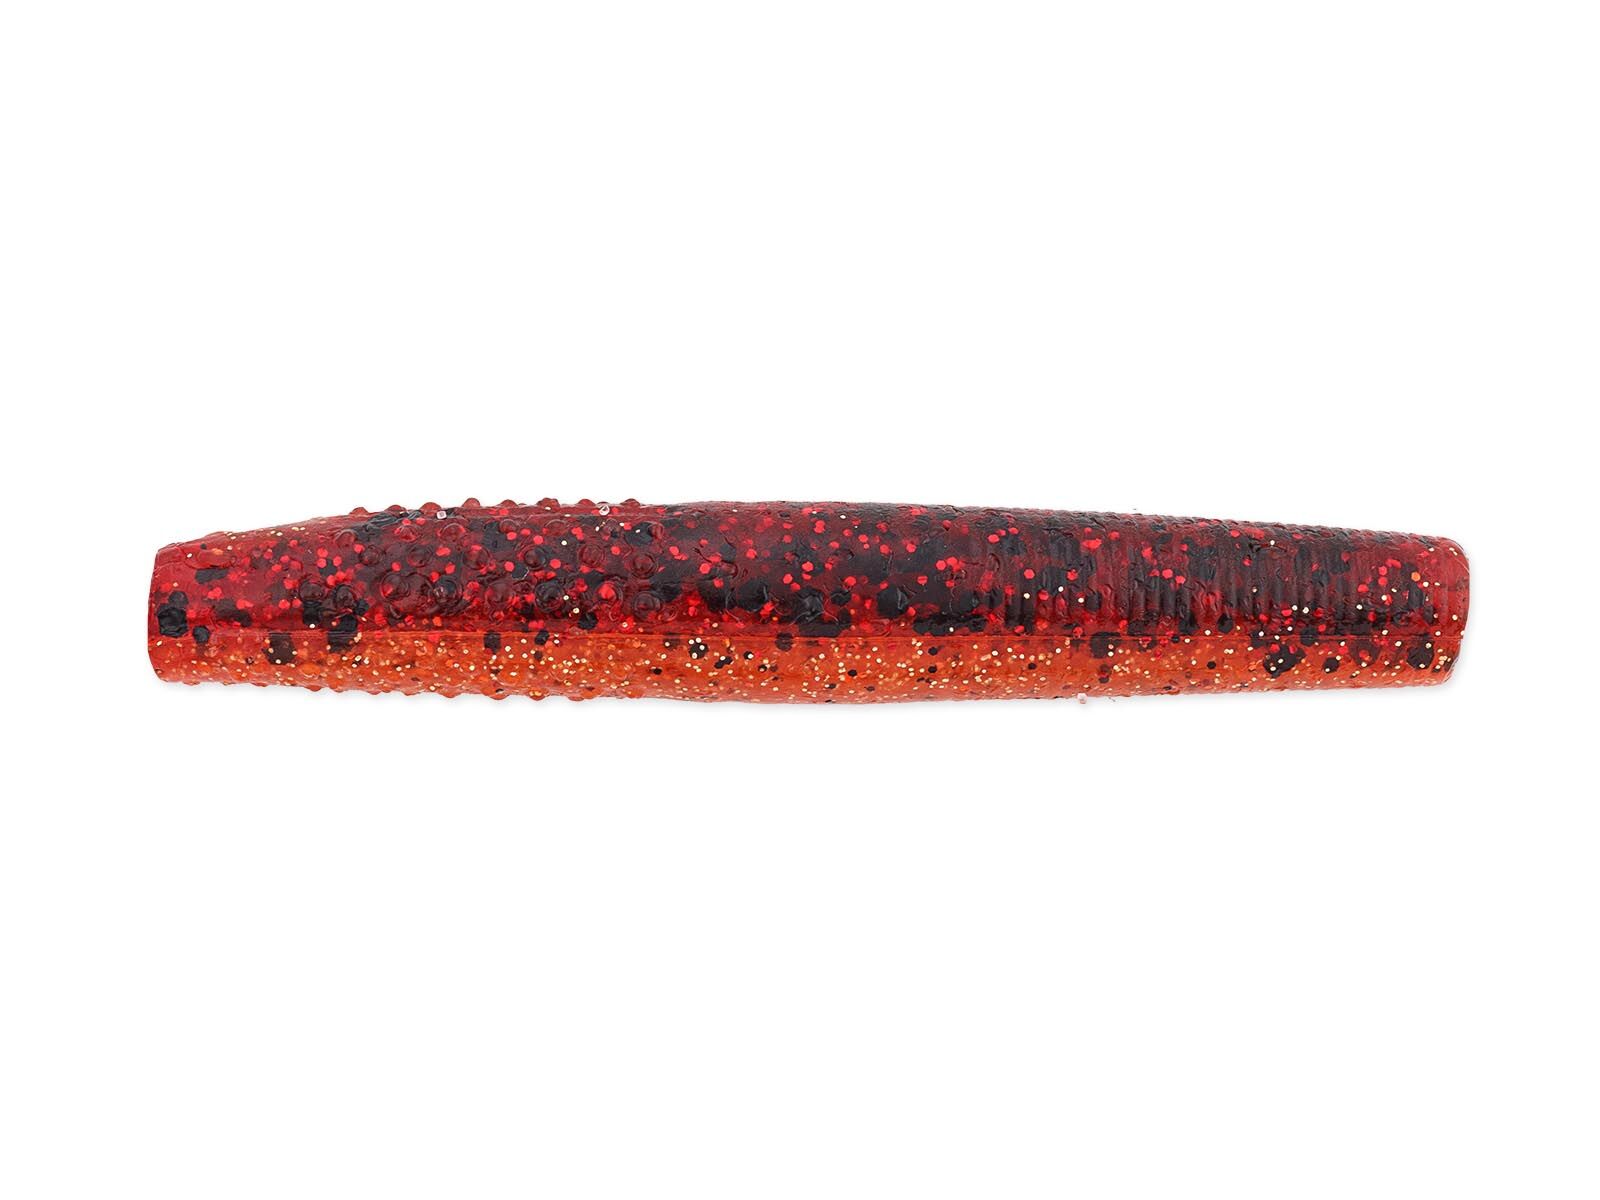 2.75" Finesse TRD - Fire Craw